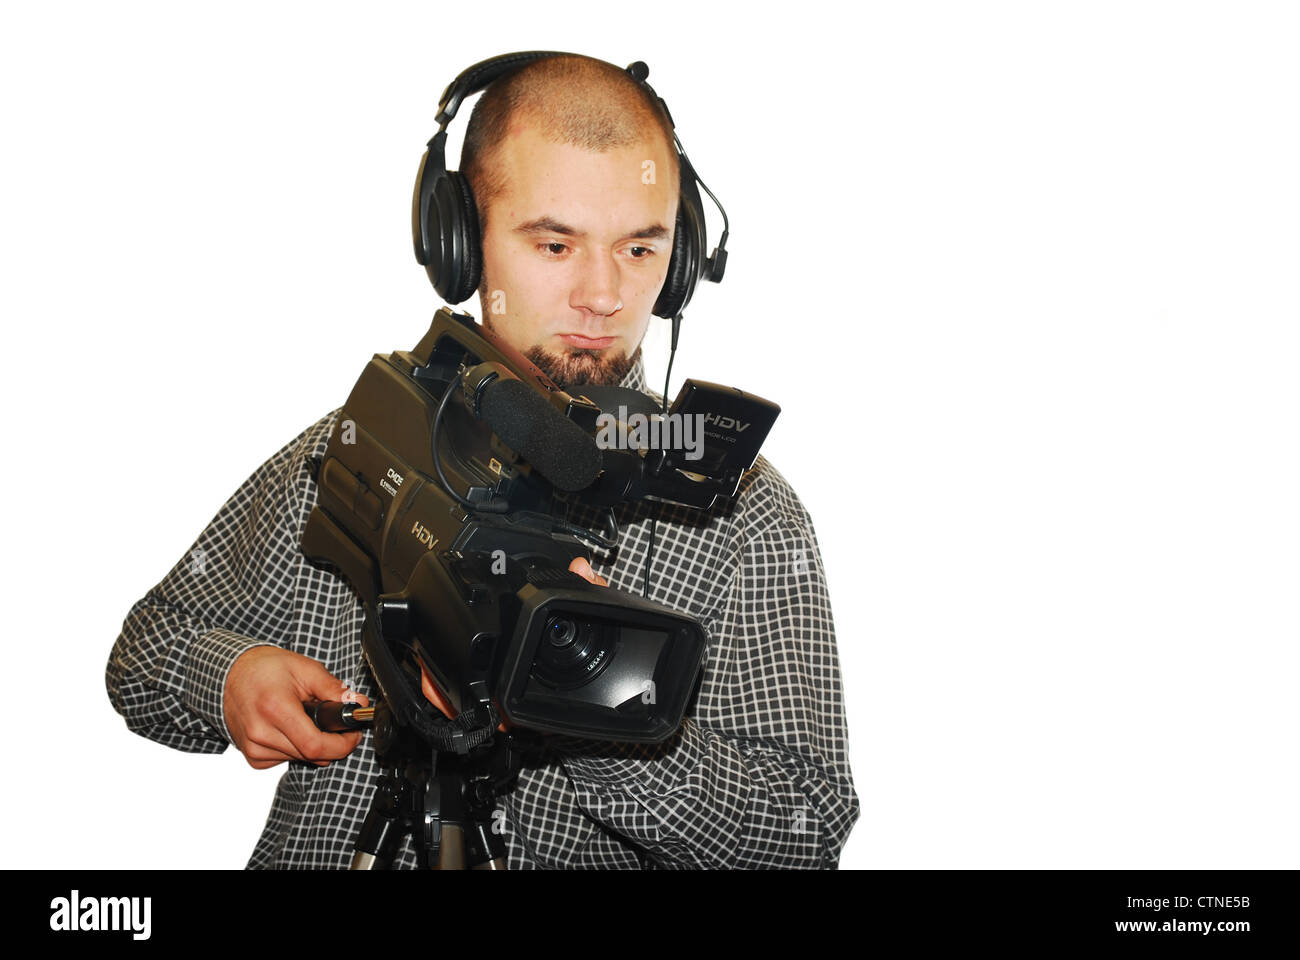 image with a television cameraman working with camera isolated Stock Photo